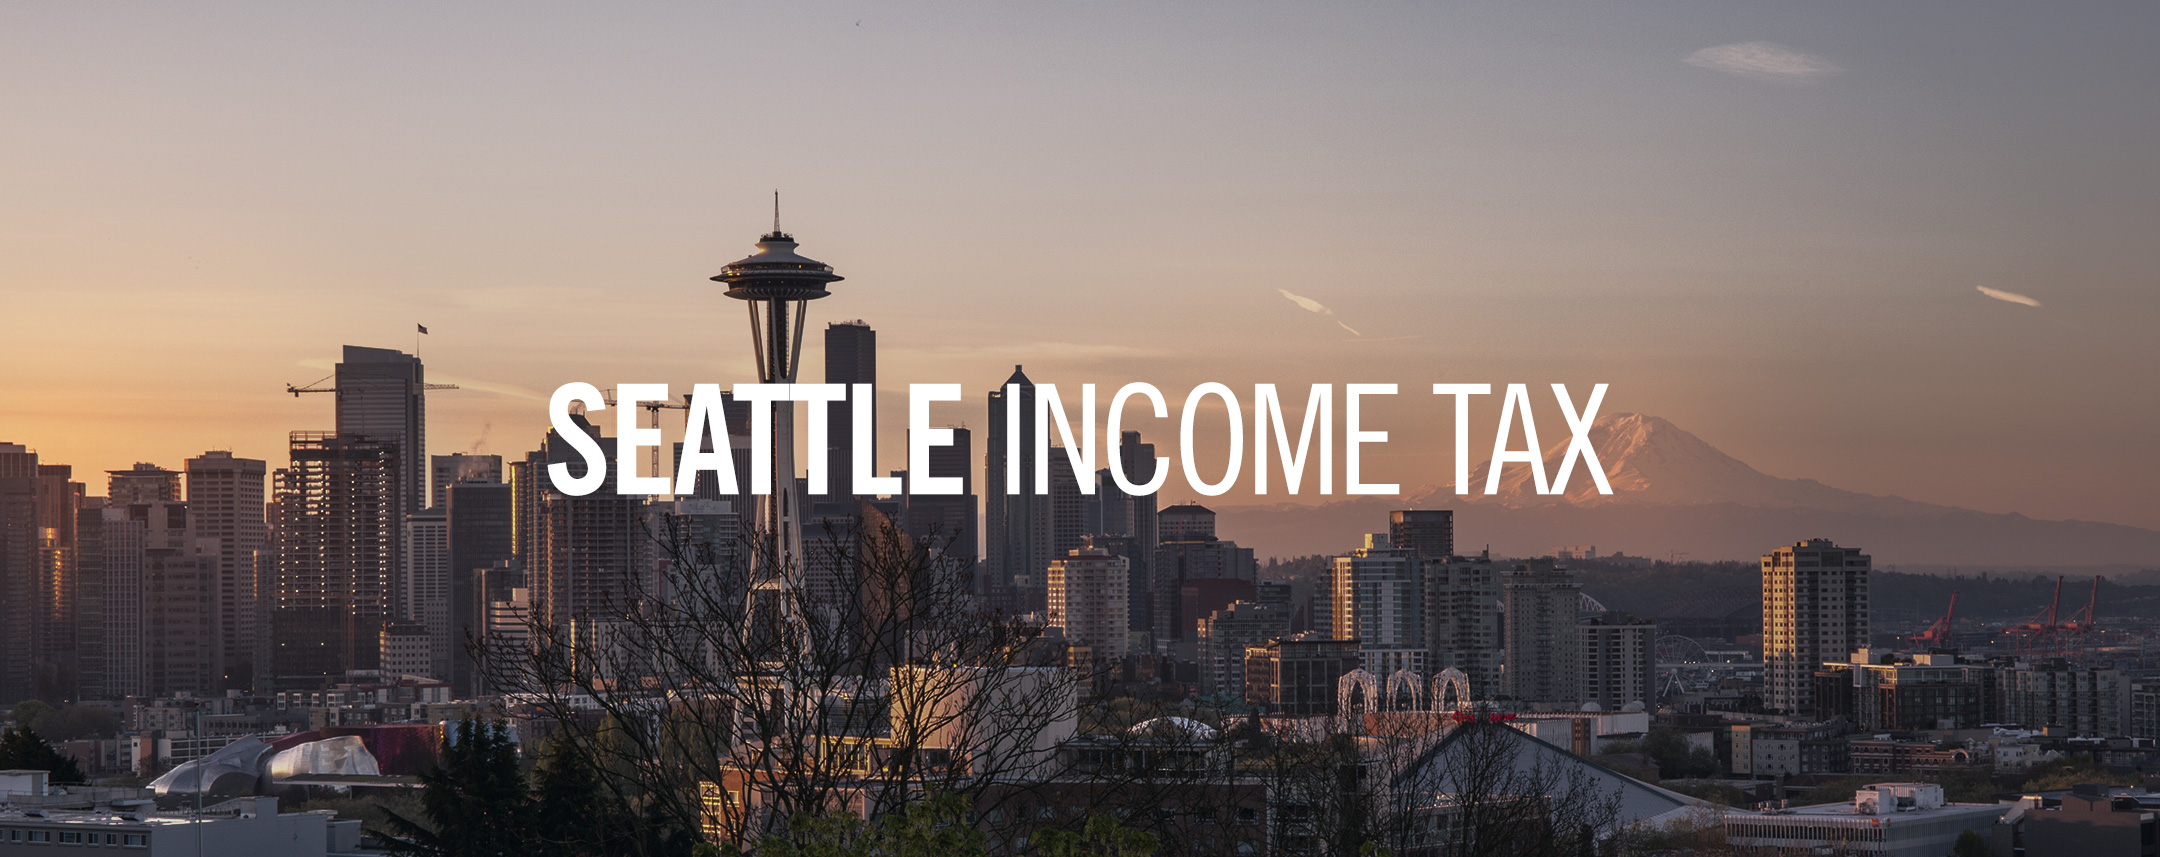 seattle-income-tax-FEATURED.jpg